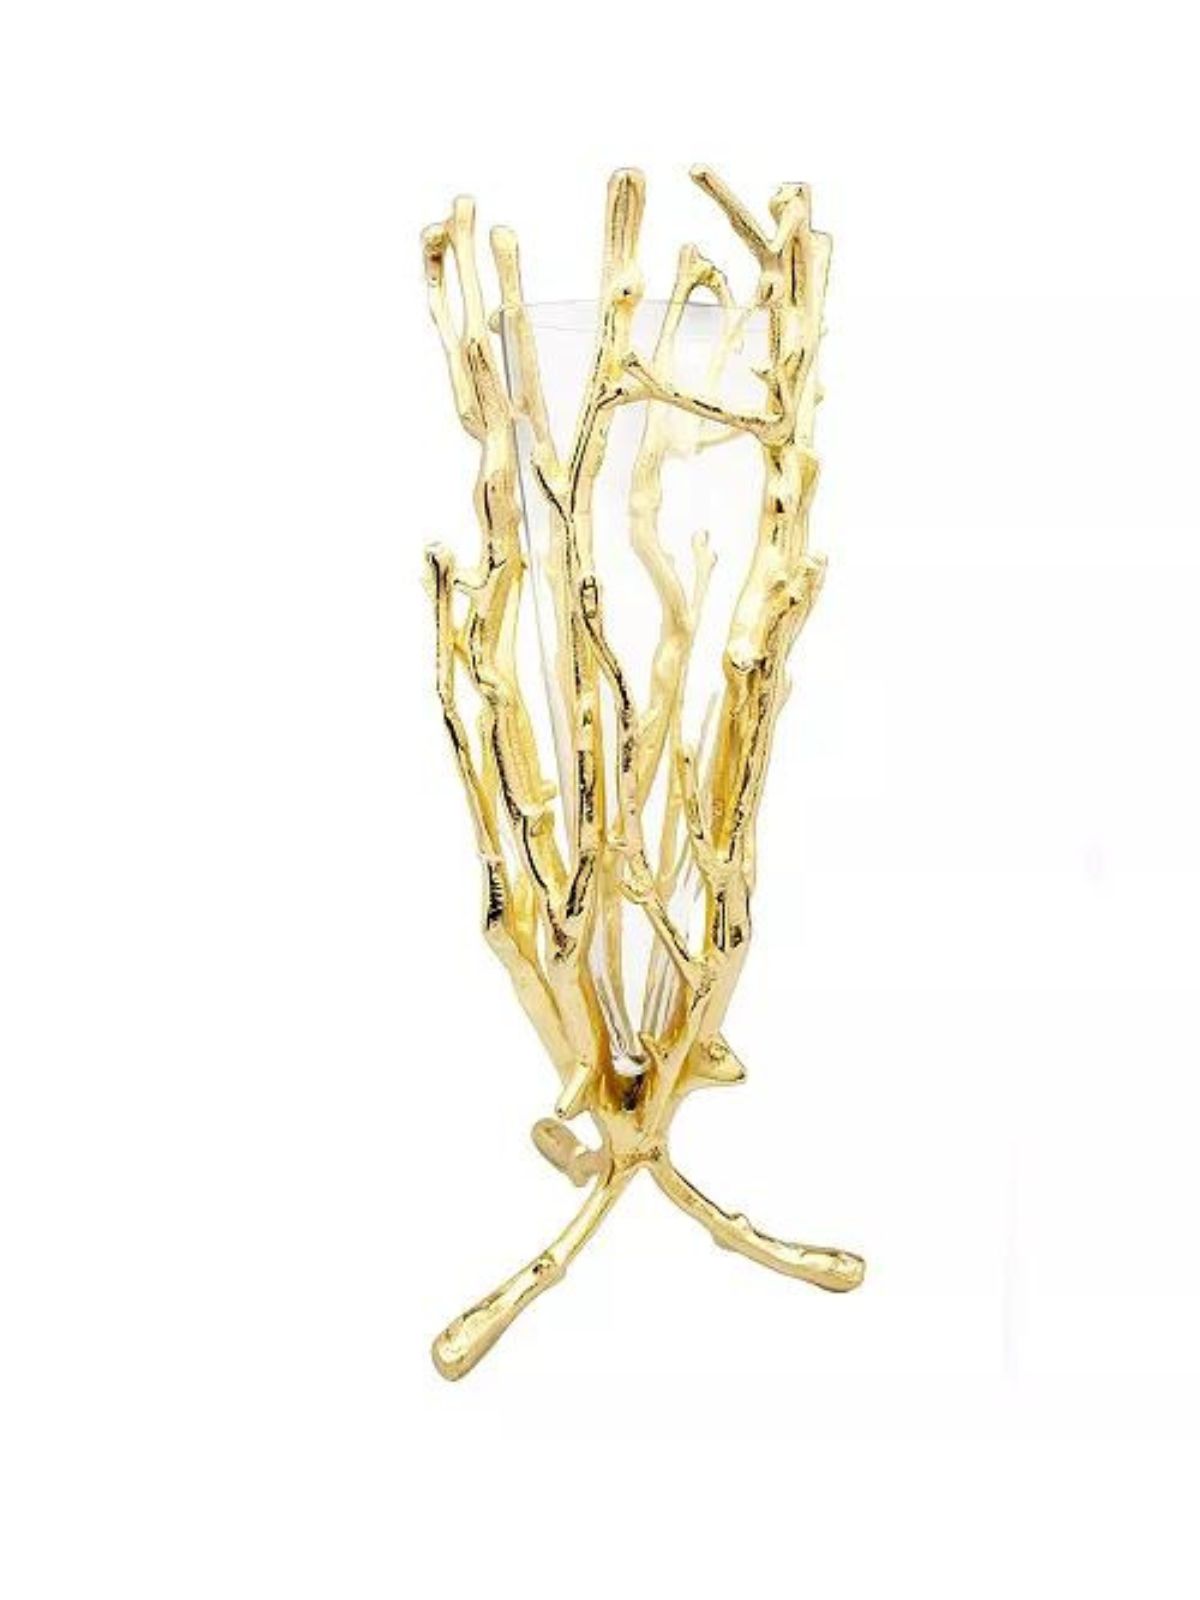 19H Gold Metal Branch Floral Designer Vase with Luxurious Glass Insert - KYA Home Decor.